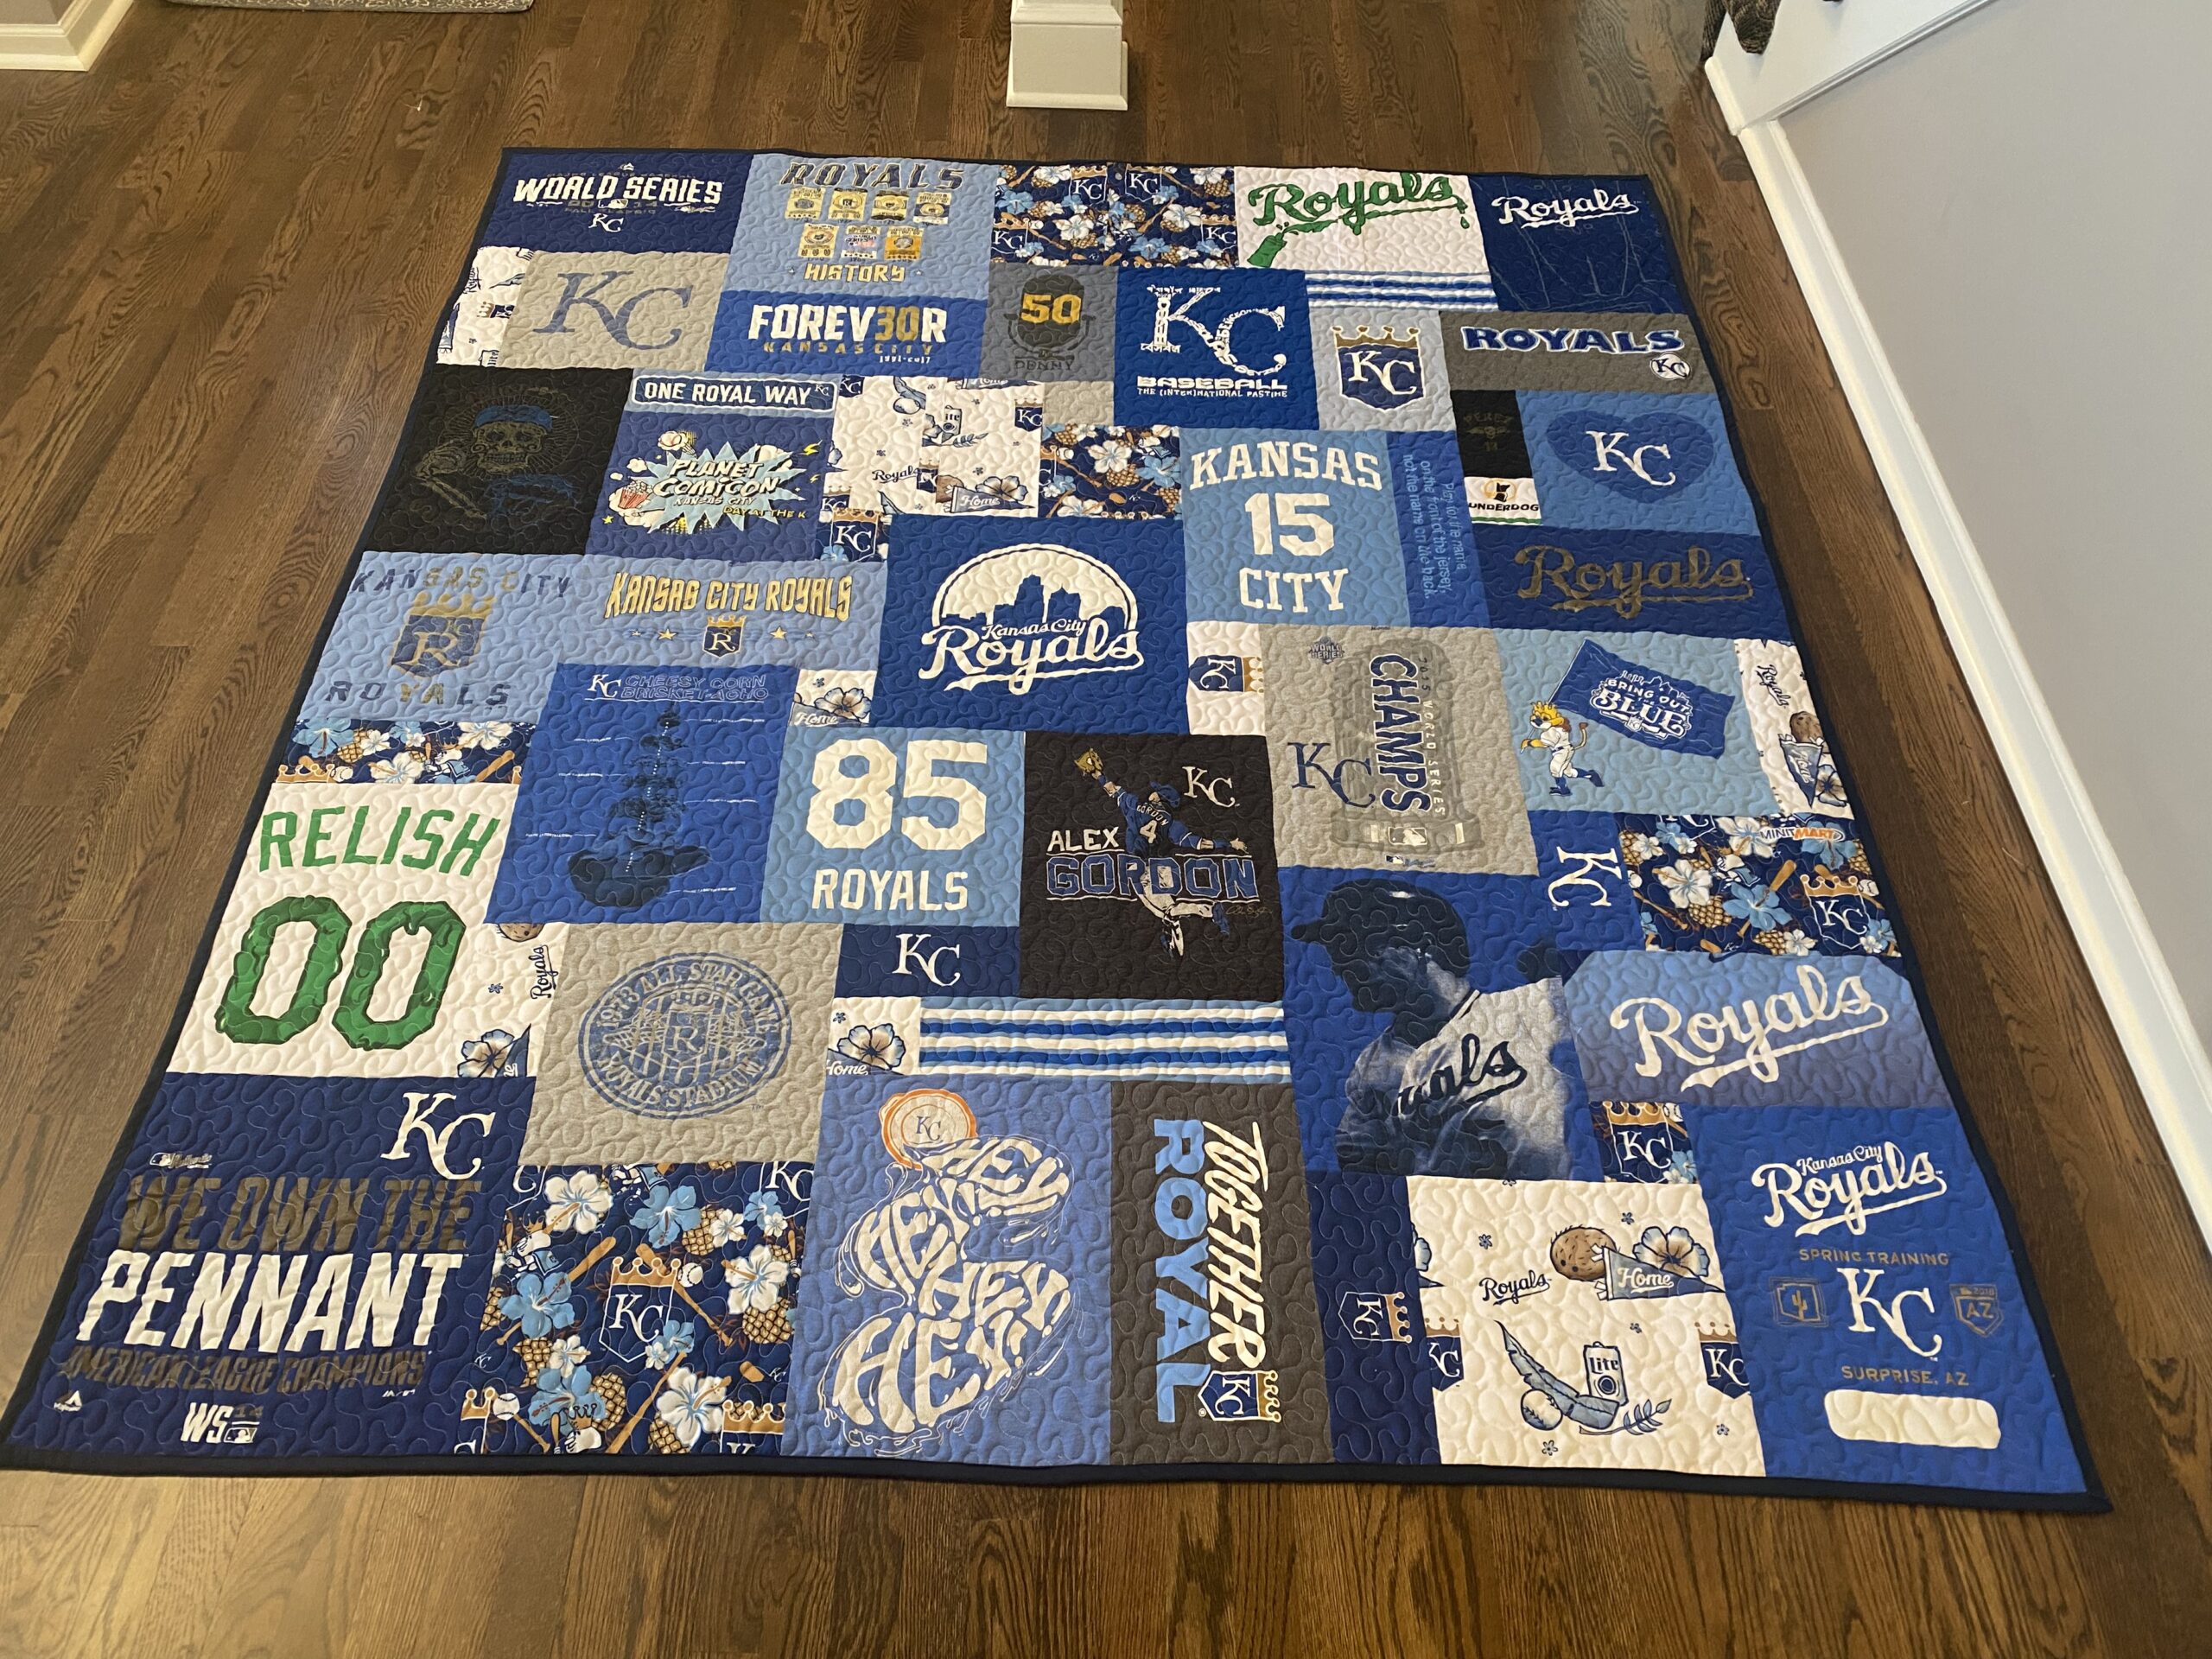 A quilt made of baseball shirts on top of a table.